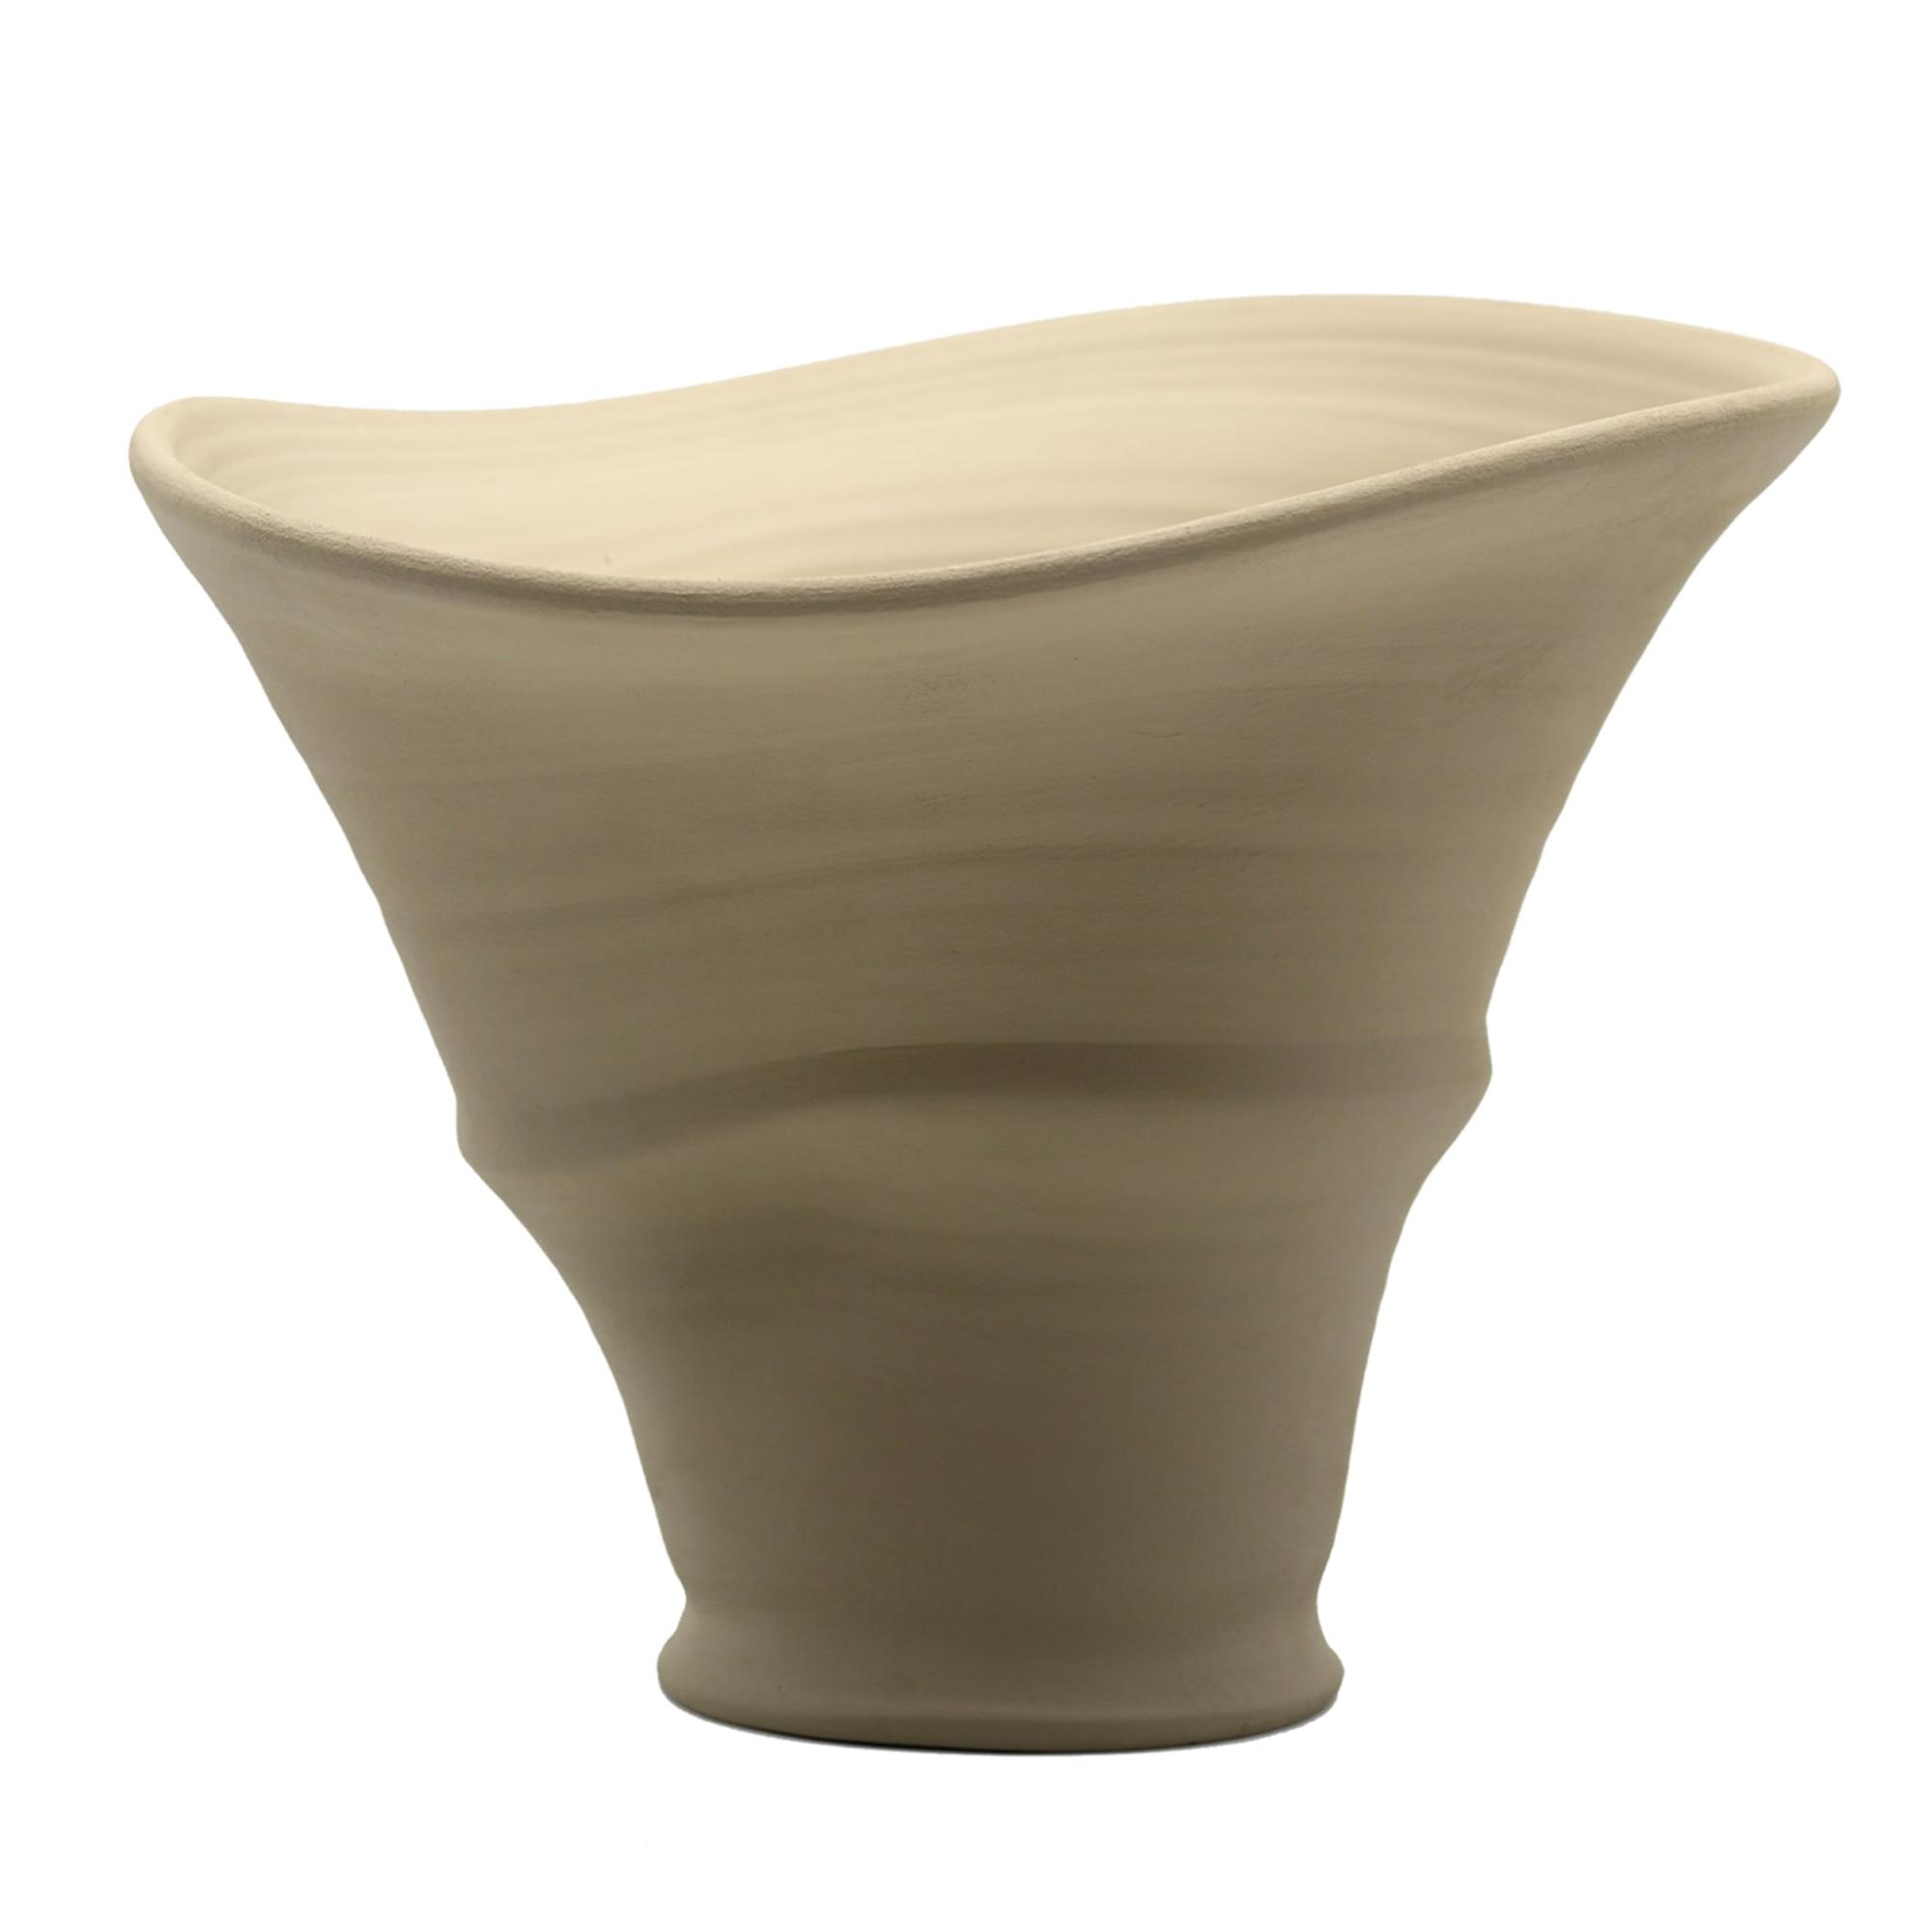 Sculpted Beige Vase with Italian Neutrality